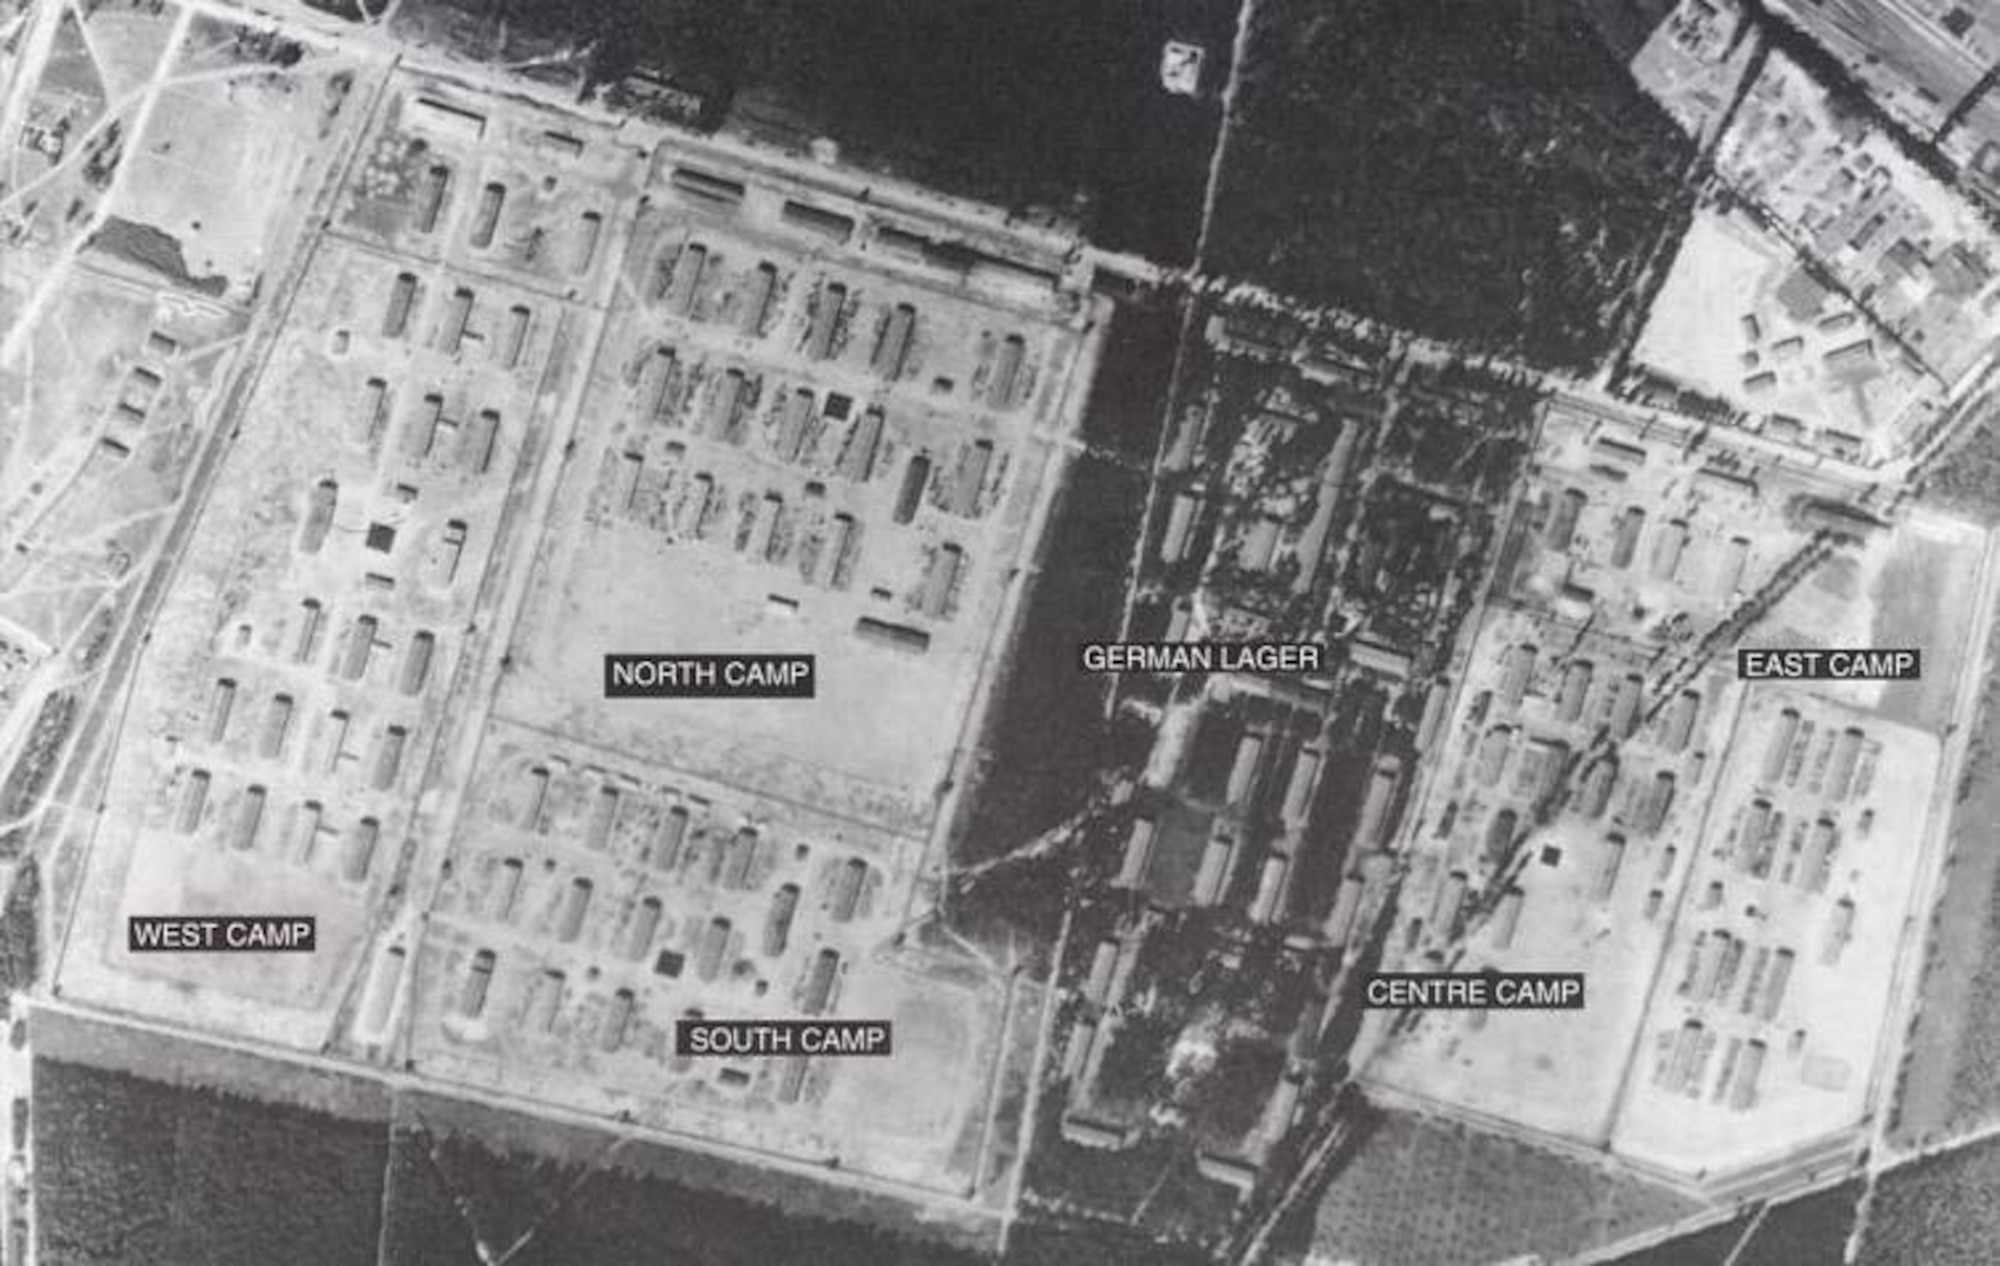 Aerial view of Stalag Luft III, Sagan, Germany, during World War II. The camp was the site of “The Great Escape” in March, 1944, and was later evacuated as Russian forces approached, the POWs being force marched west in winter weather. (Courtesy Pegasusarchive.org)